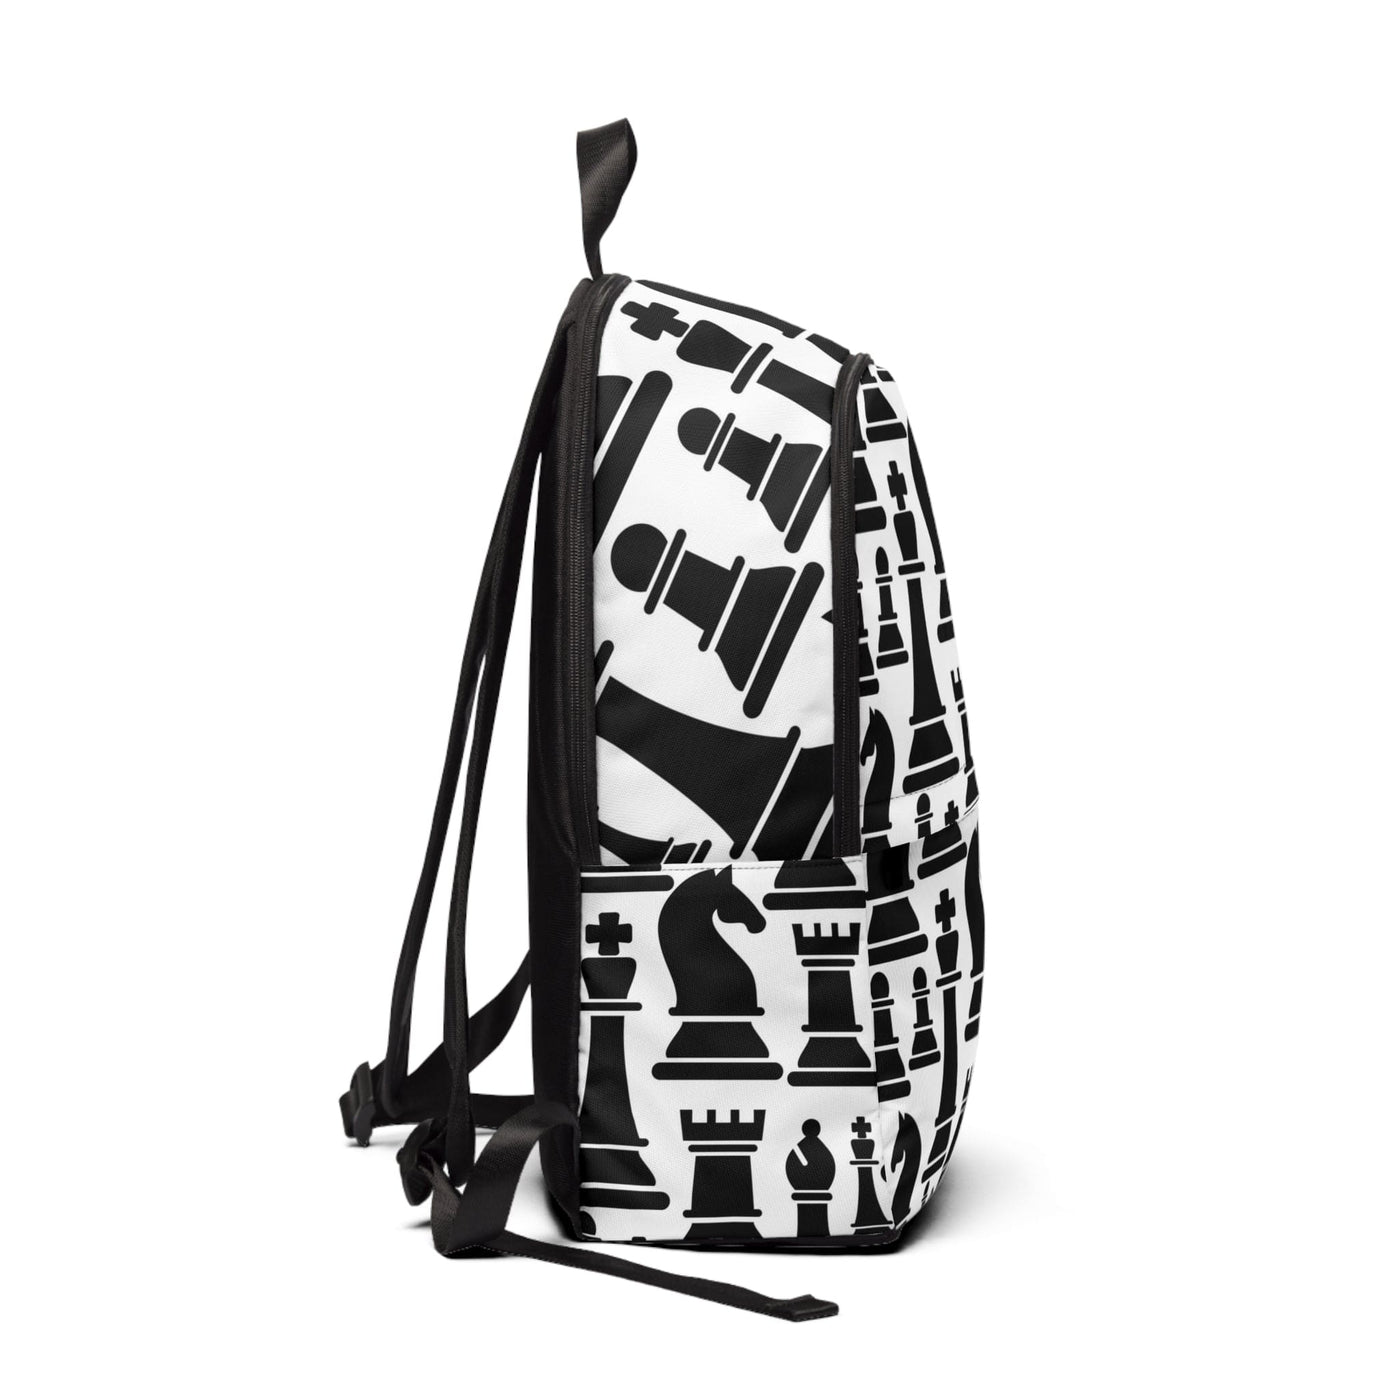 Fashion Backpack Waterproof Black And White Chess Print - Bags